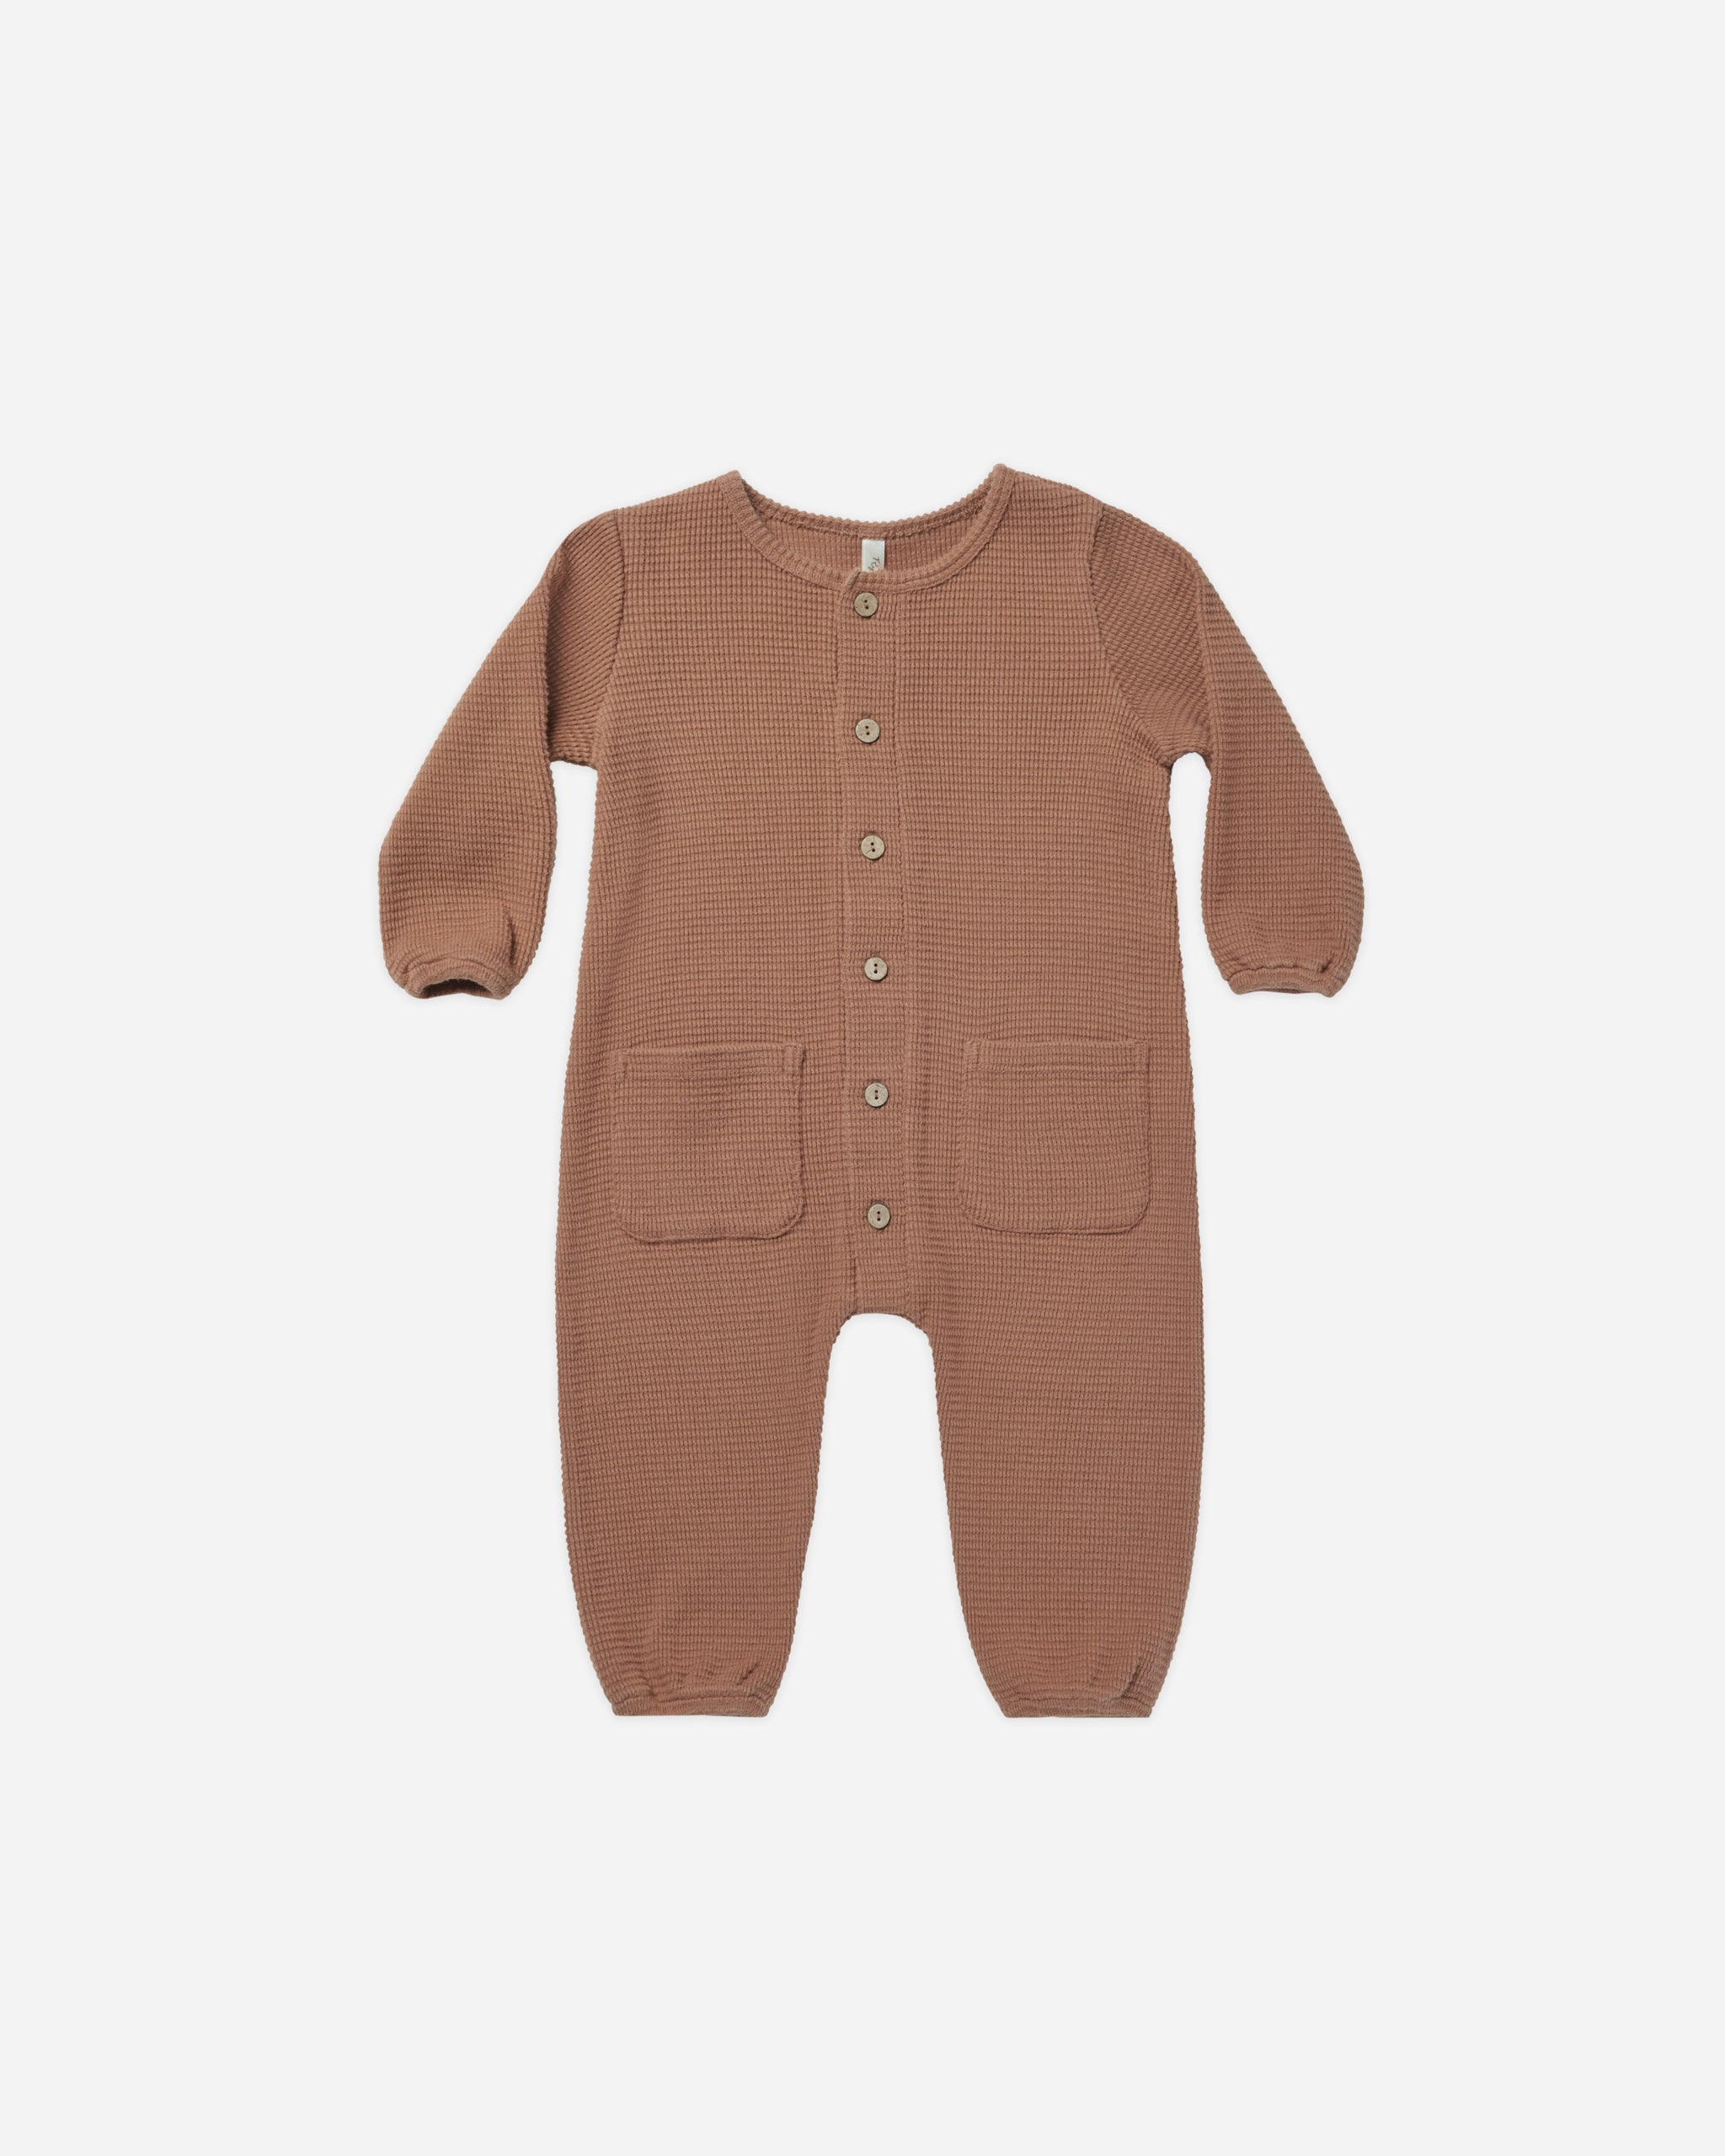 Long Sleeve Jumpsuit || Spice - Rylee + Cru | Kids Clothes | Trendy Baby Clothes | Modern Infant Outfits |